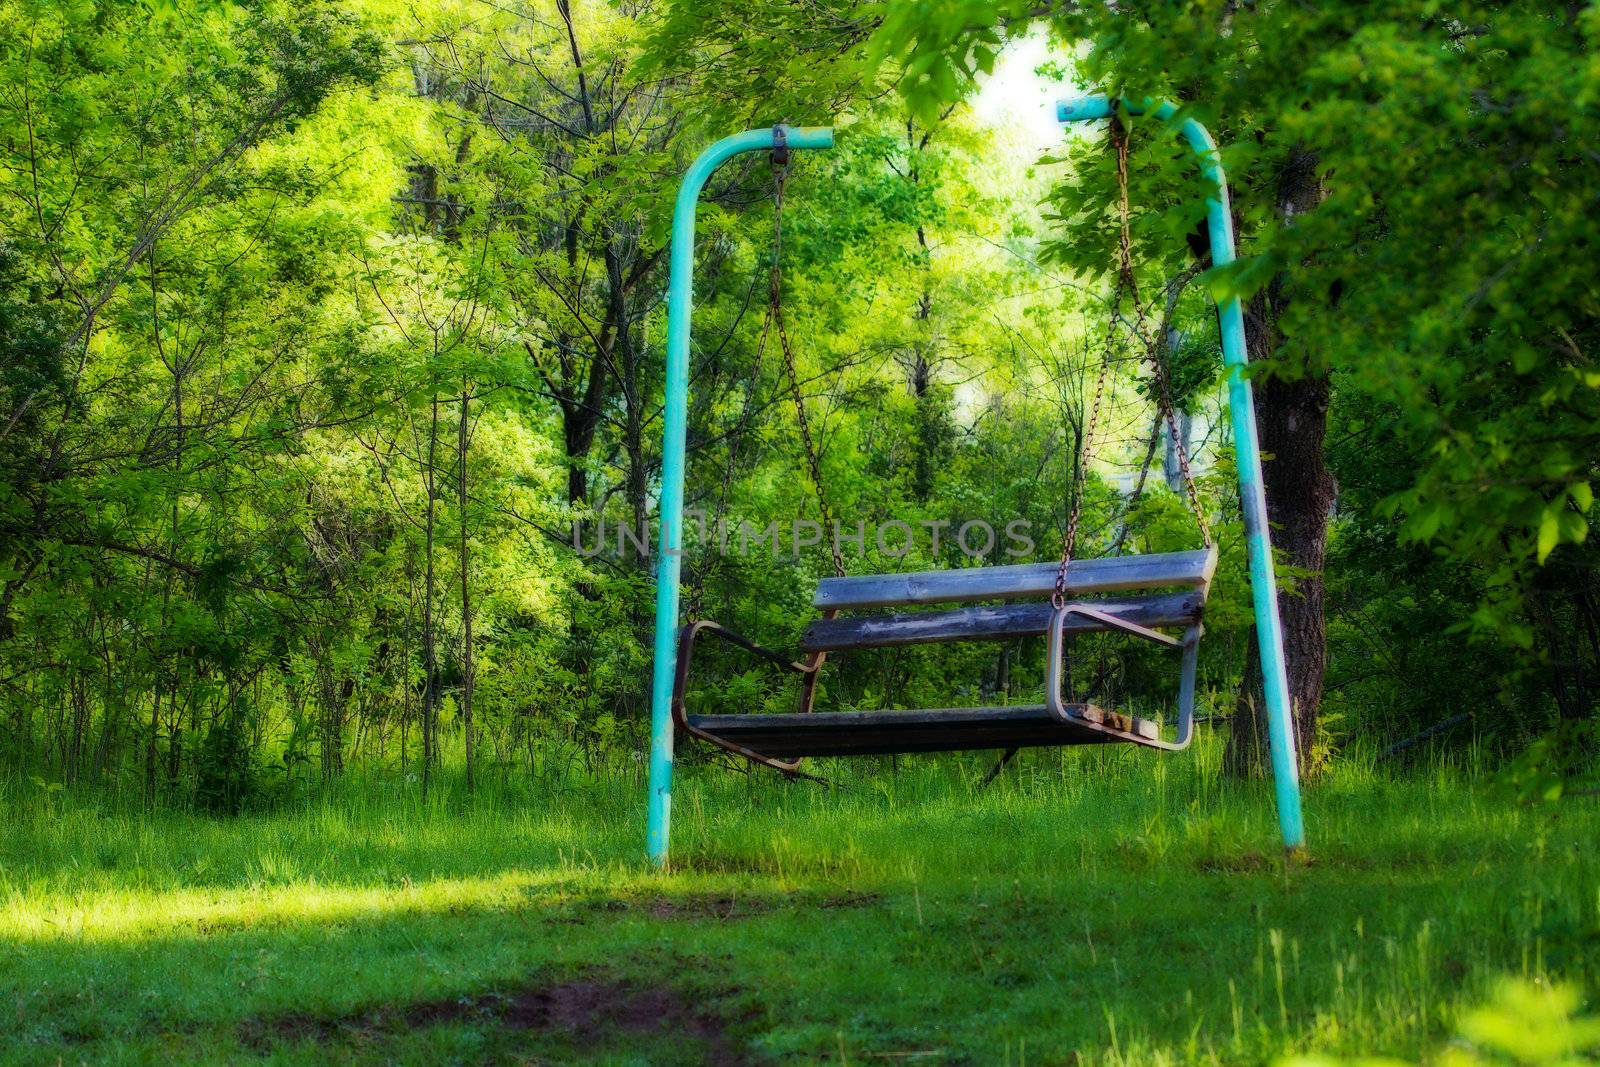 A swinging bench deep in the woods.